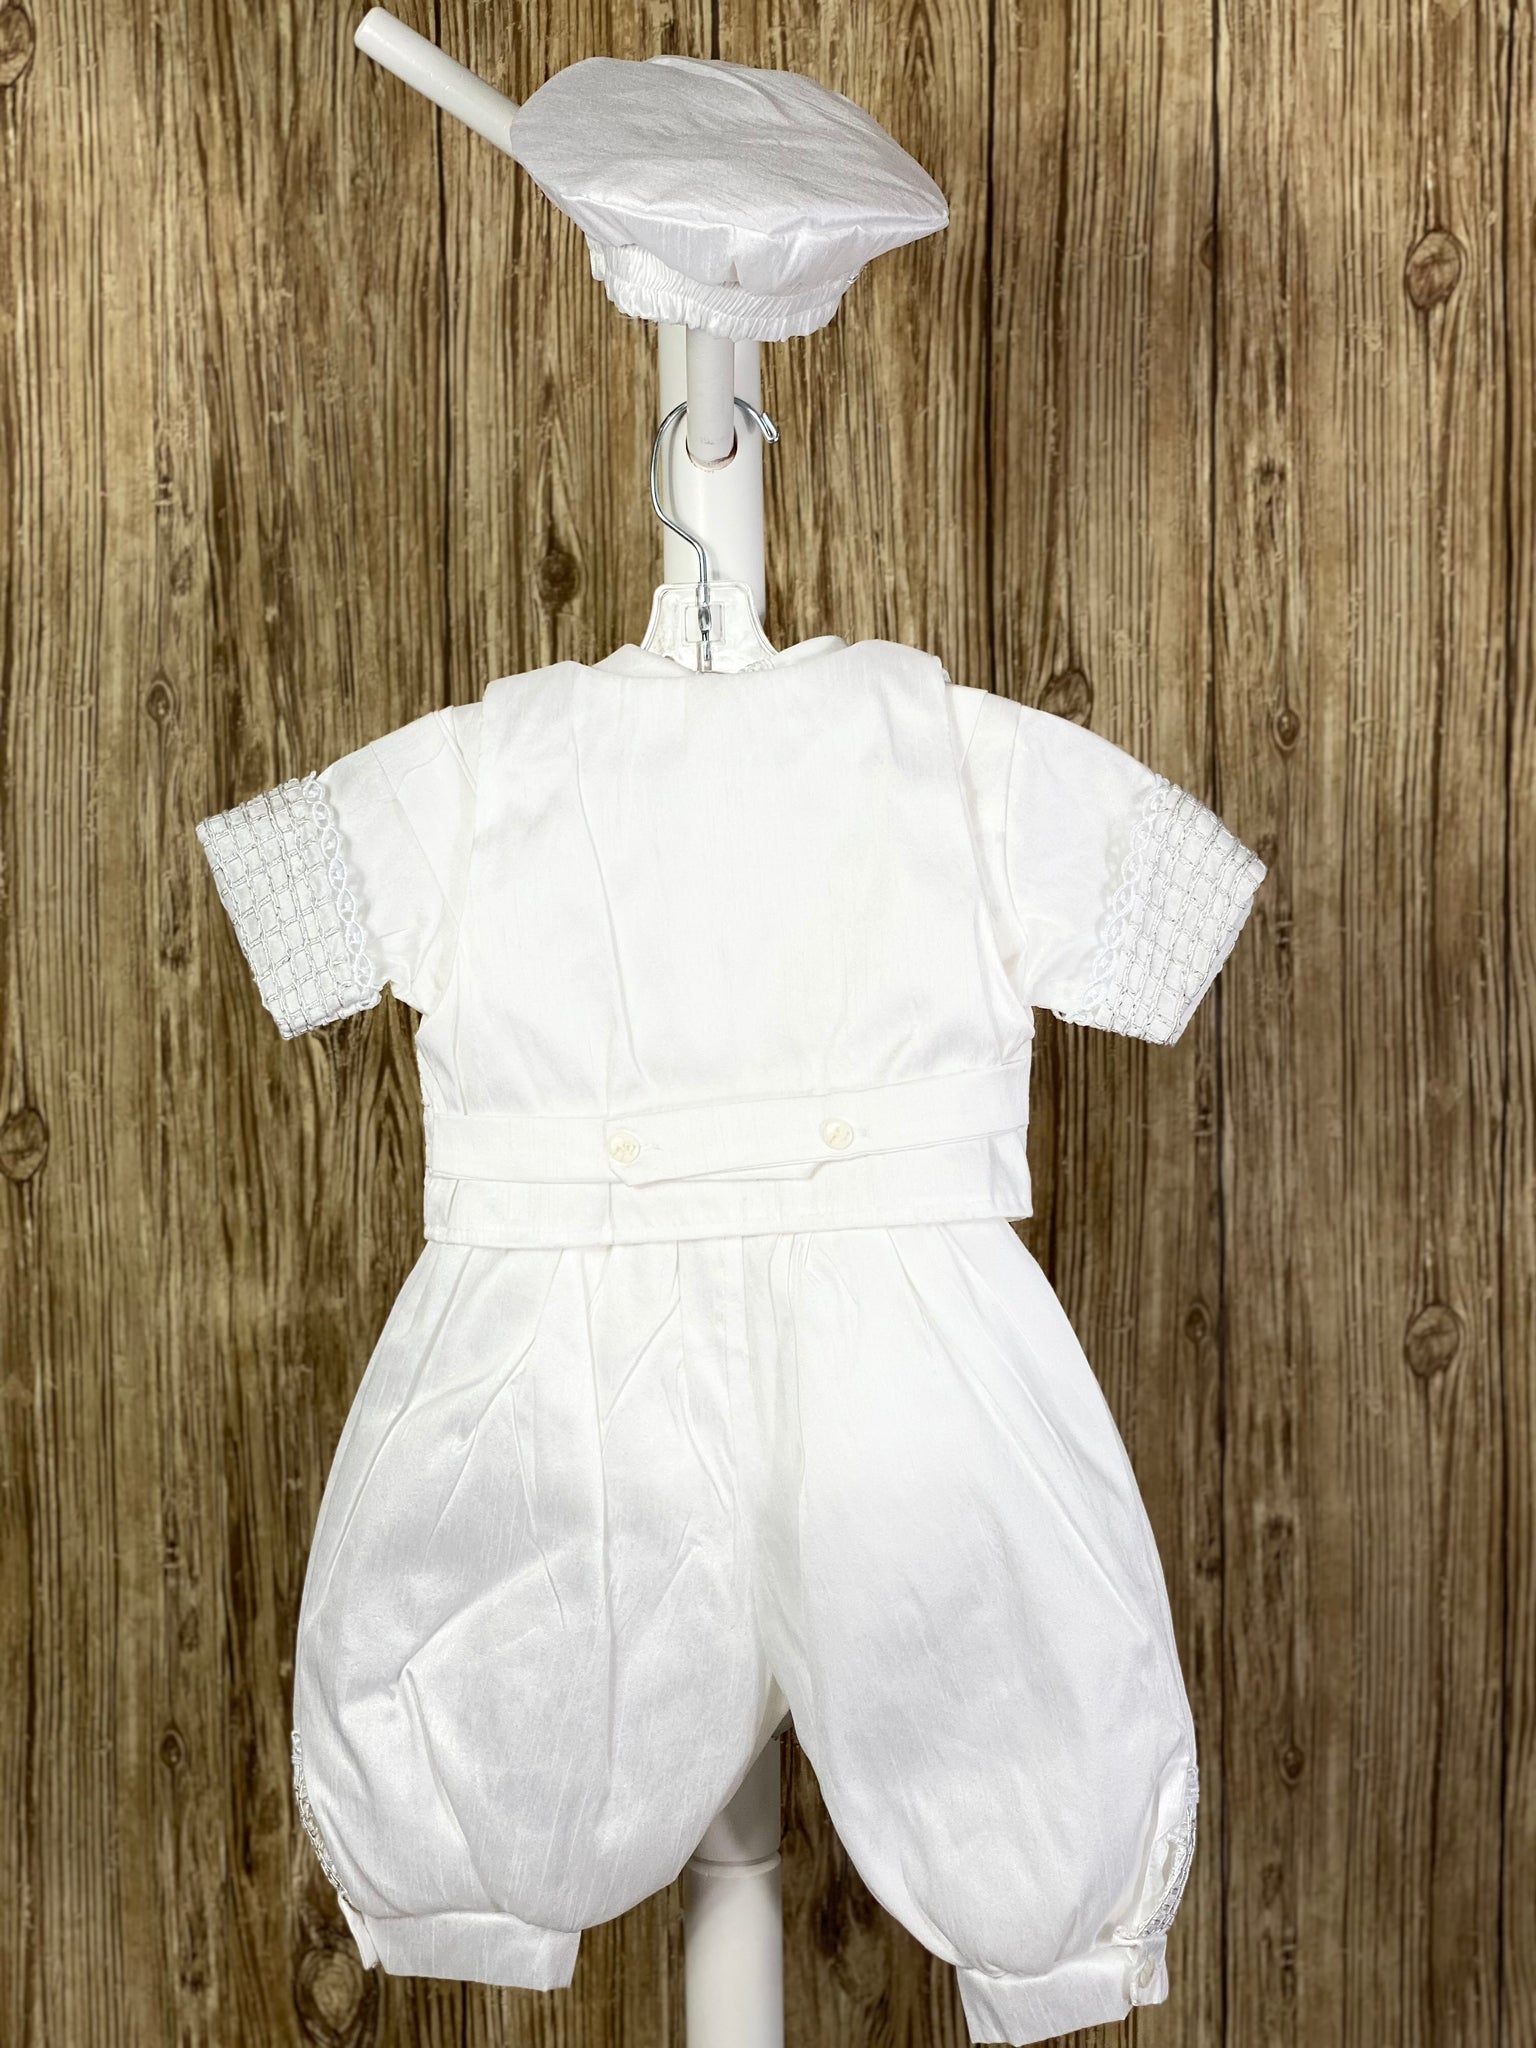 This a beautiful, one-of-a-kind boy’s baptism gown/set.  Lovely clothes for a precious child.  4- piece set including vest, shirt, pants, beret Satin, White pictures shown Grid pattern on vest with embroidered jeweled crosses in checkered pattern Grid pattern on pant legs, cummerbund, shirt bodice, and arm cuffs Intricate trim around cuffs and collar Thin lines around beret trim Tassel pin with 3 rhinestone centered circles